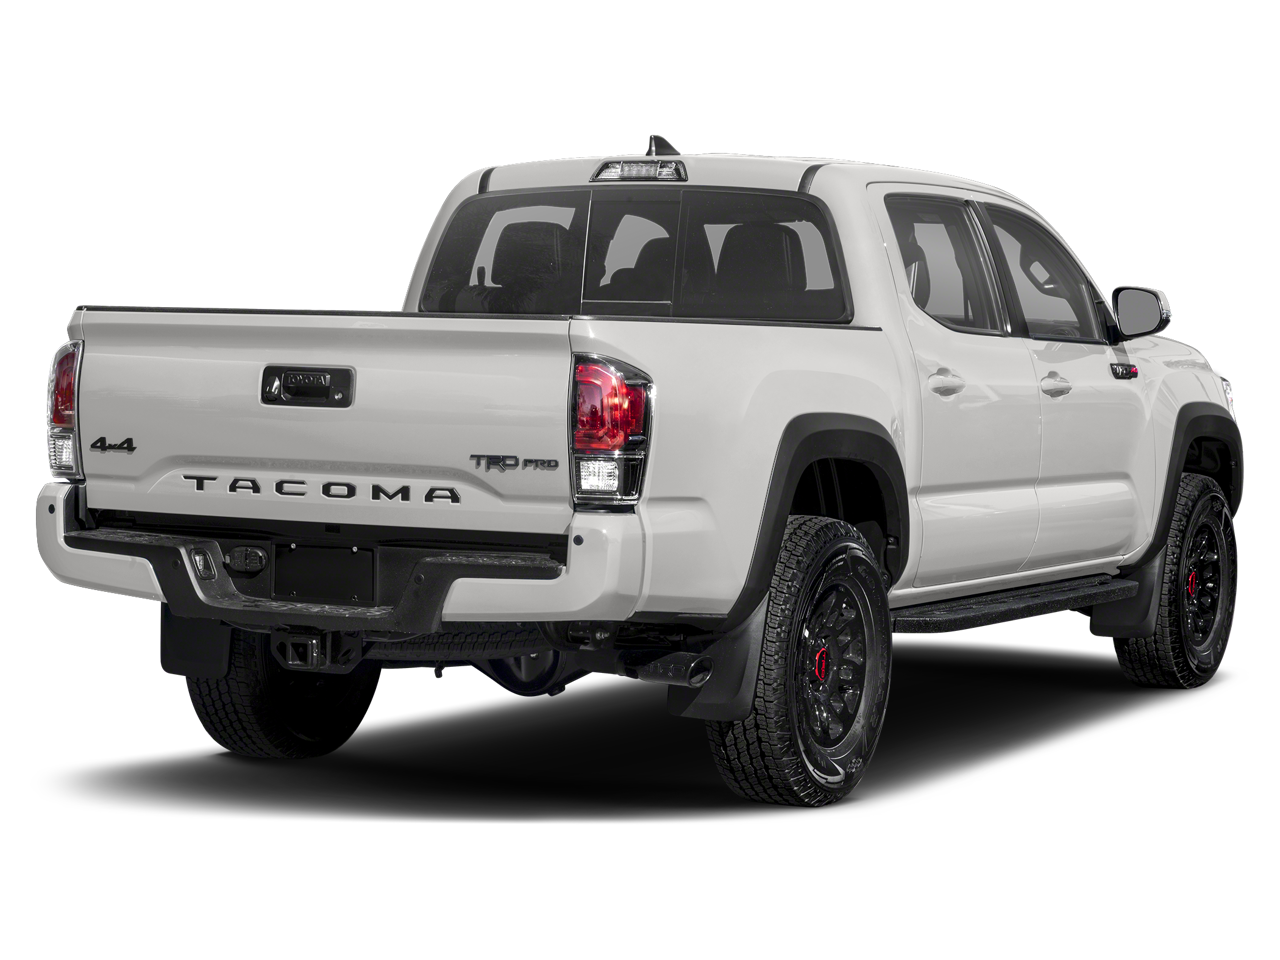 2019 Toyota Tacoma 4WD TRD Pro Double Cab *UNDER 25K MILES*